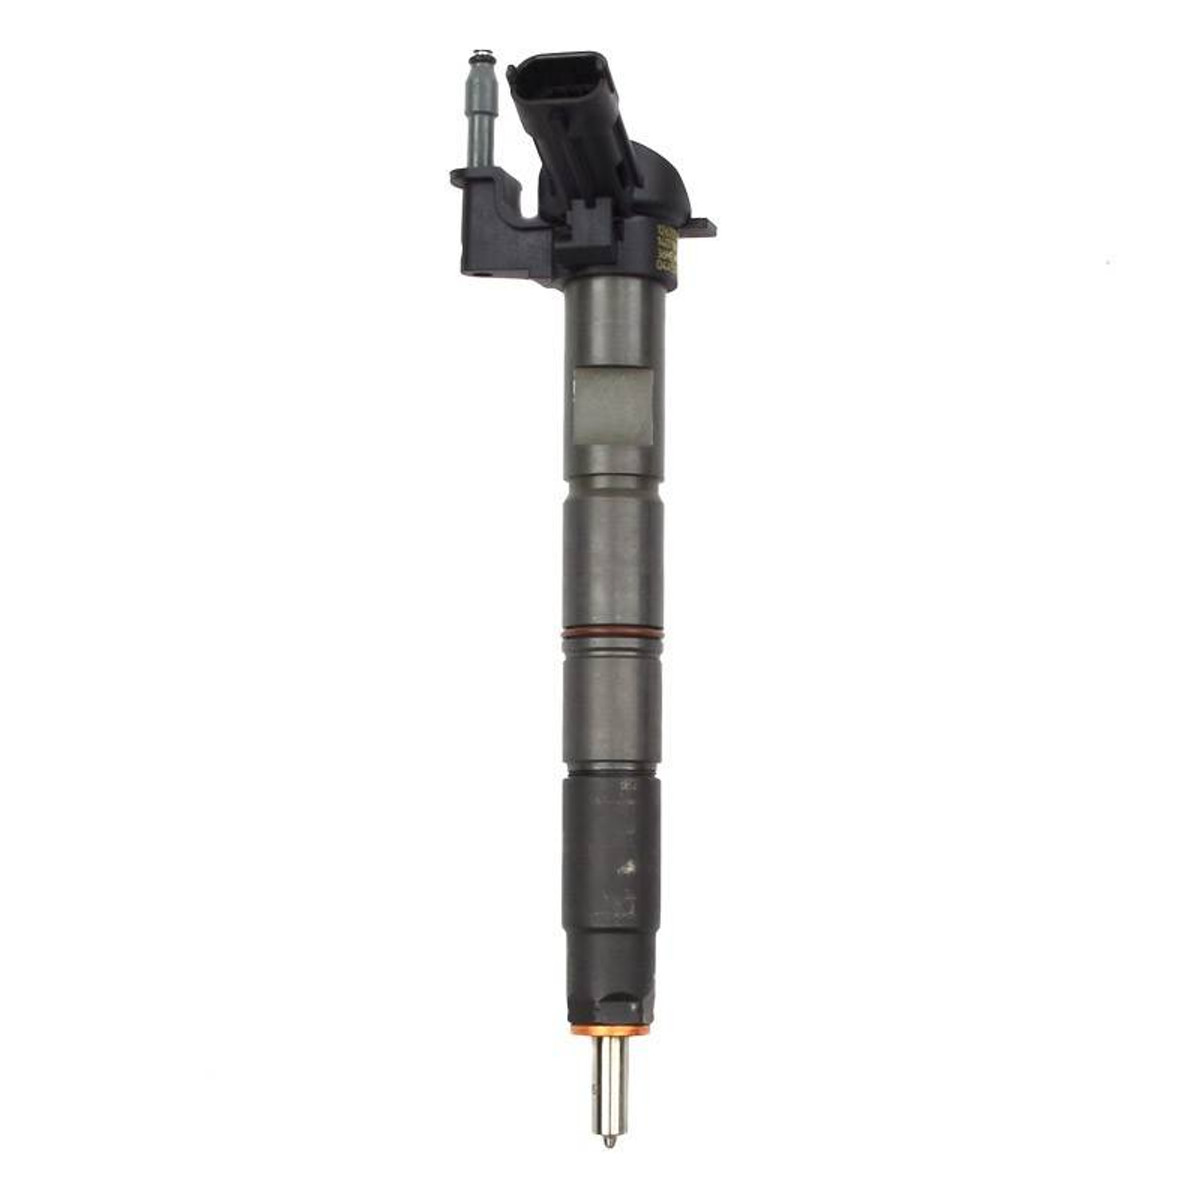 Factory OEM Remanufactured RACE4 50% Over 6.6L 2011-2016 LML Duramax Injector 26LPM 0986435410-R4